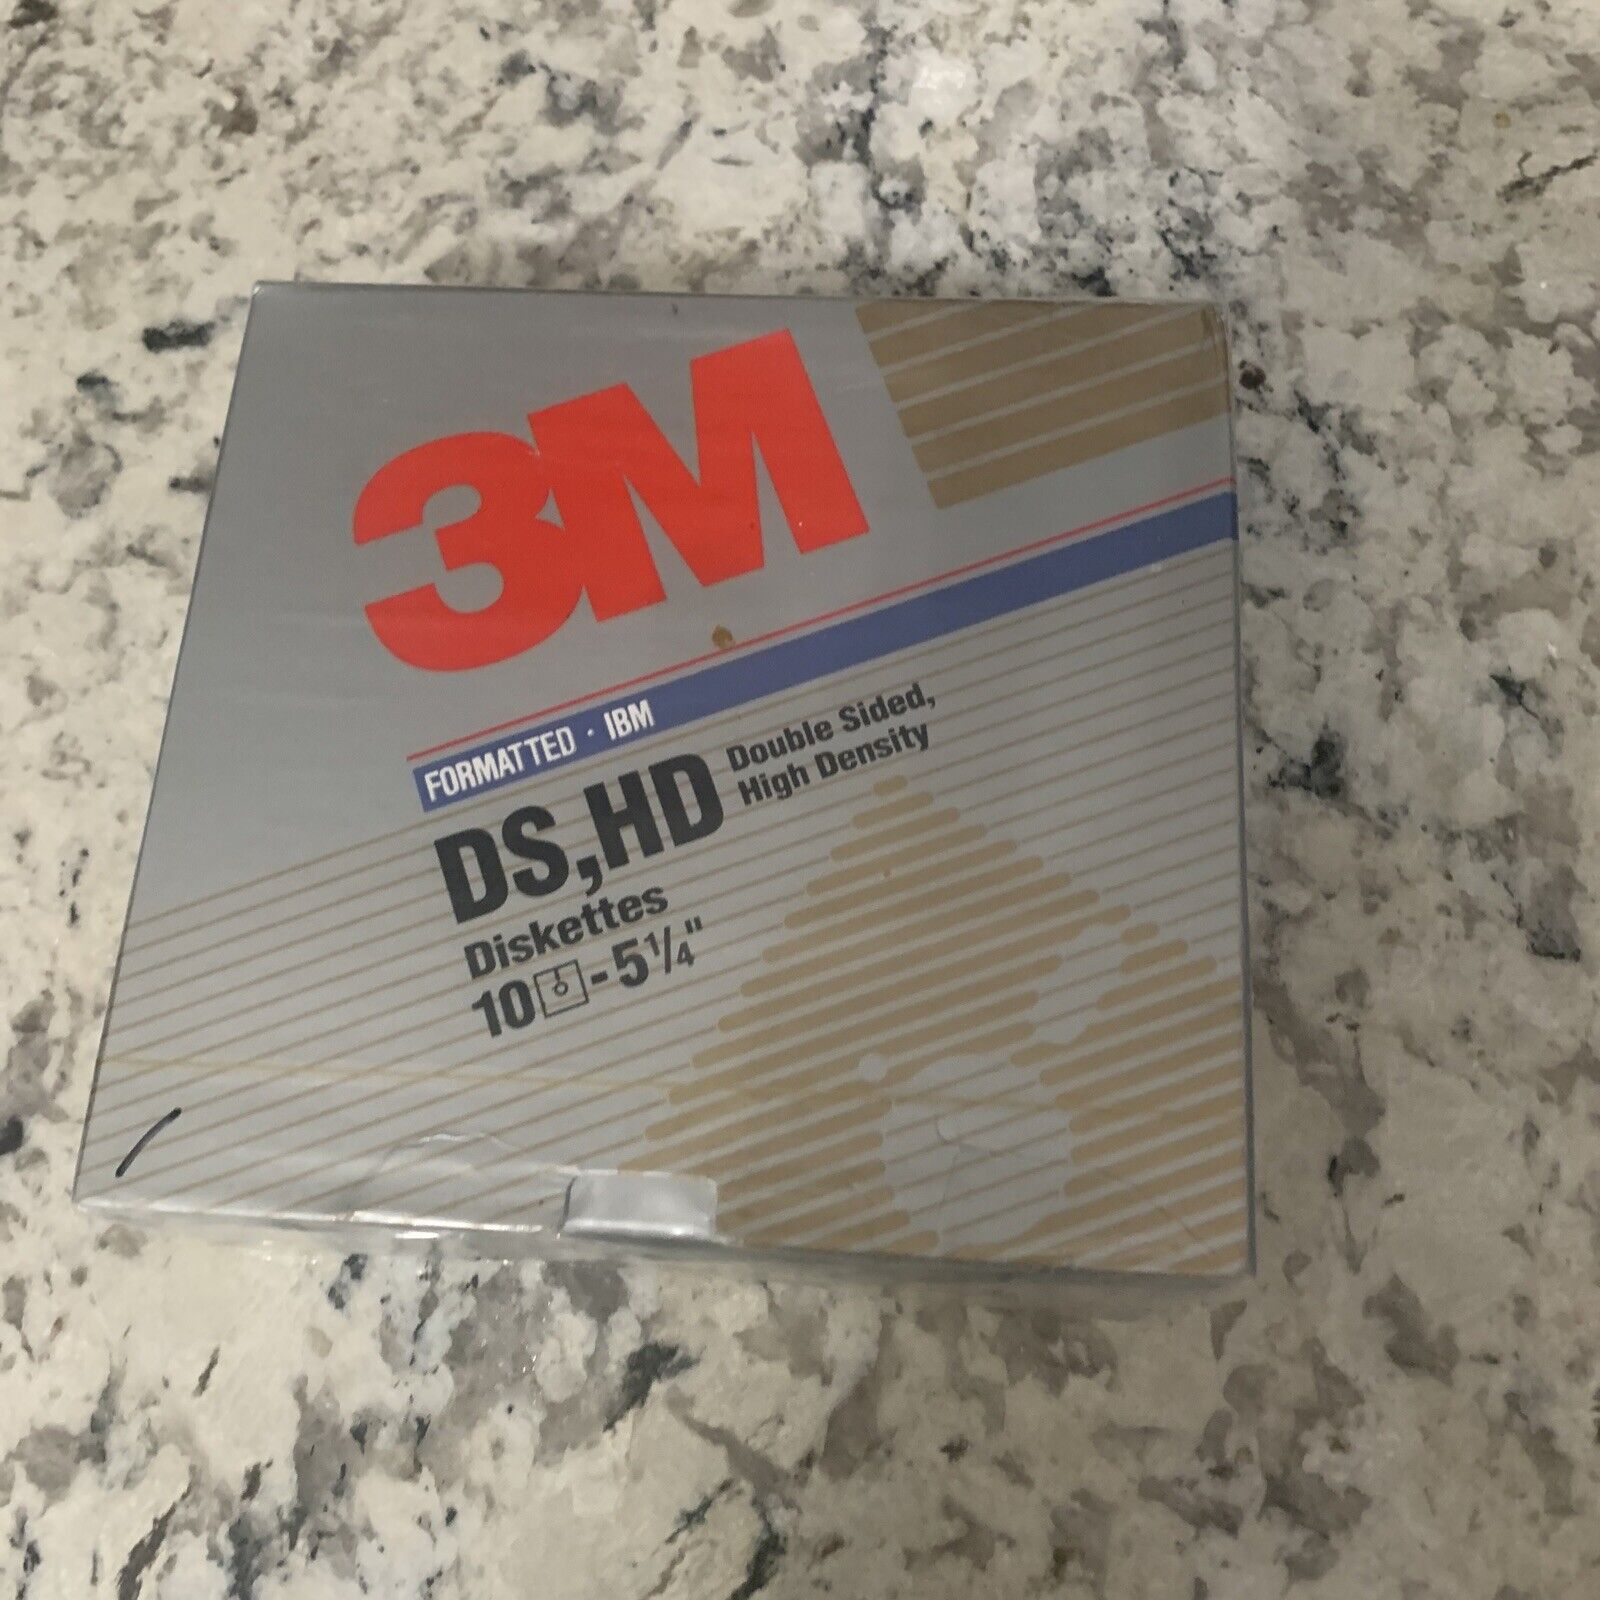 3M 10x Floppy Diskettes IBM Formatted 1.44MB DS, HD 12883  Brand New Seale